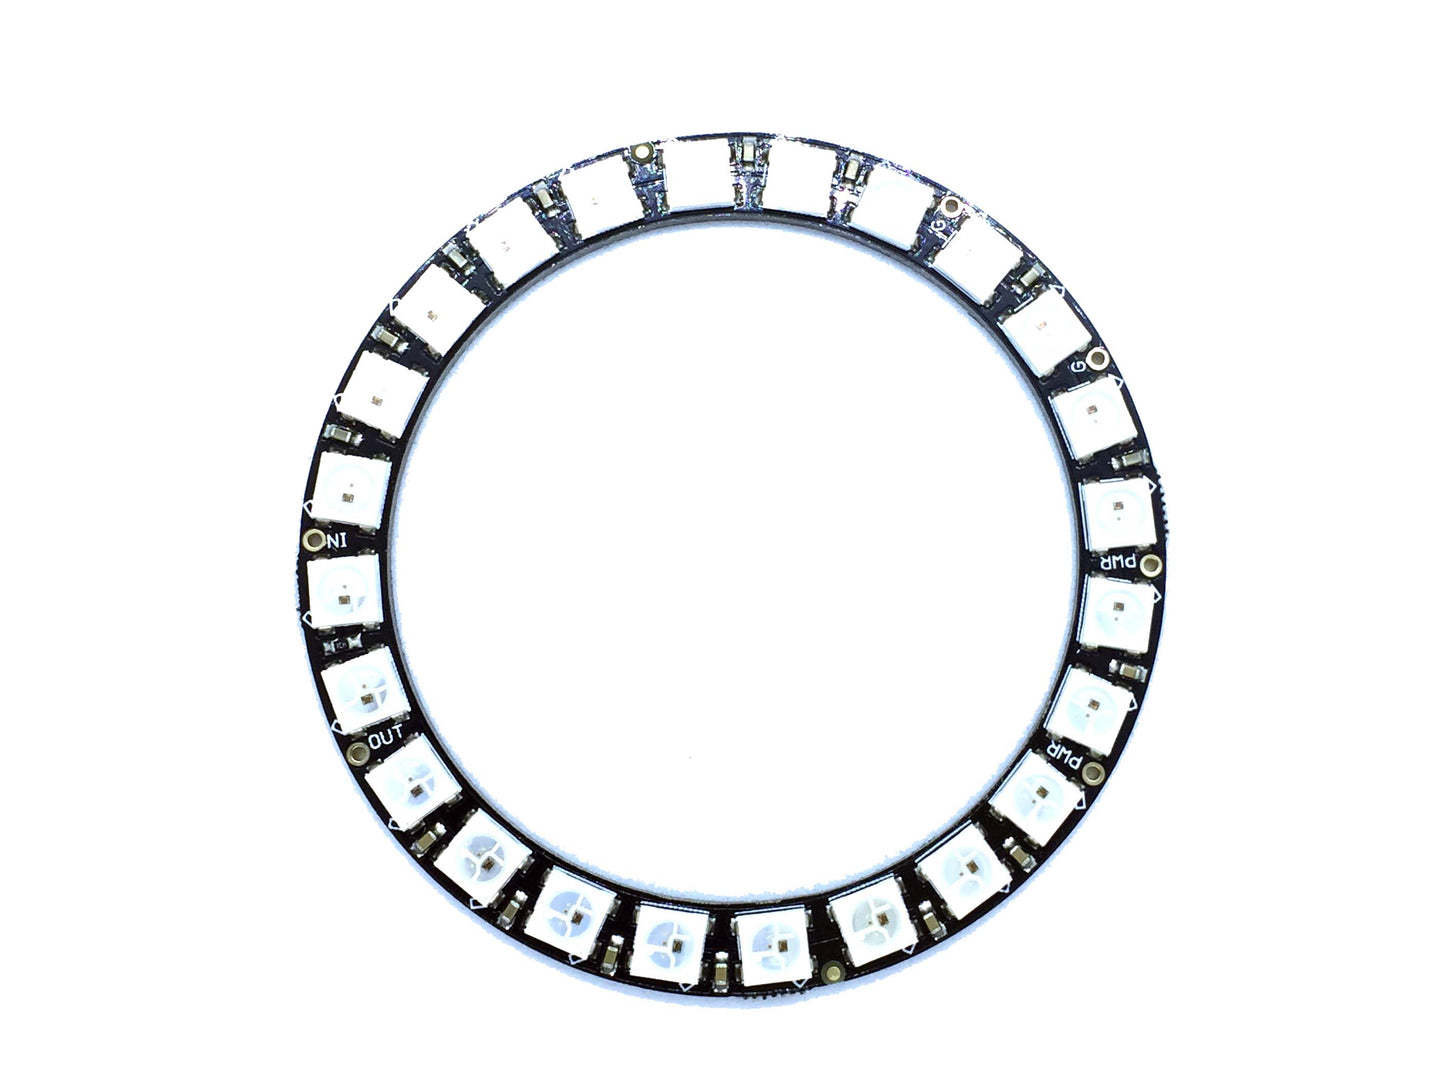 NeoPixel Ring 24x5050 RGB LED with Integrated Drivers